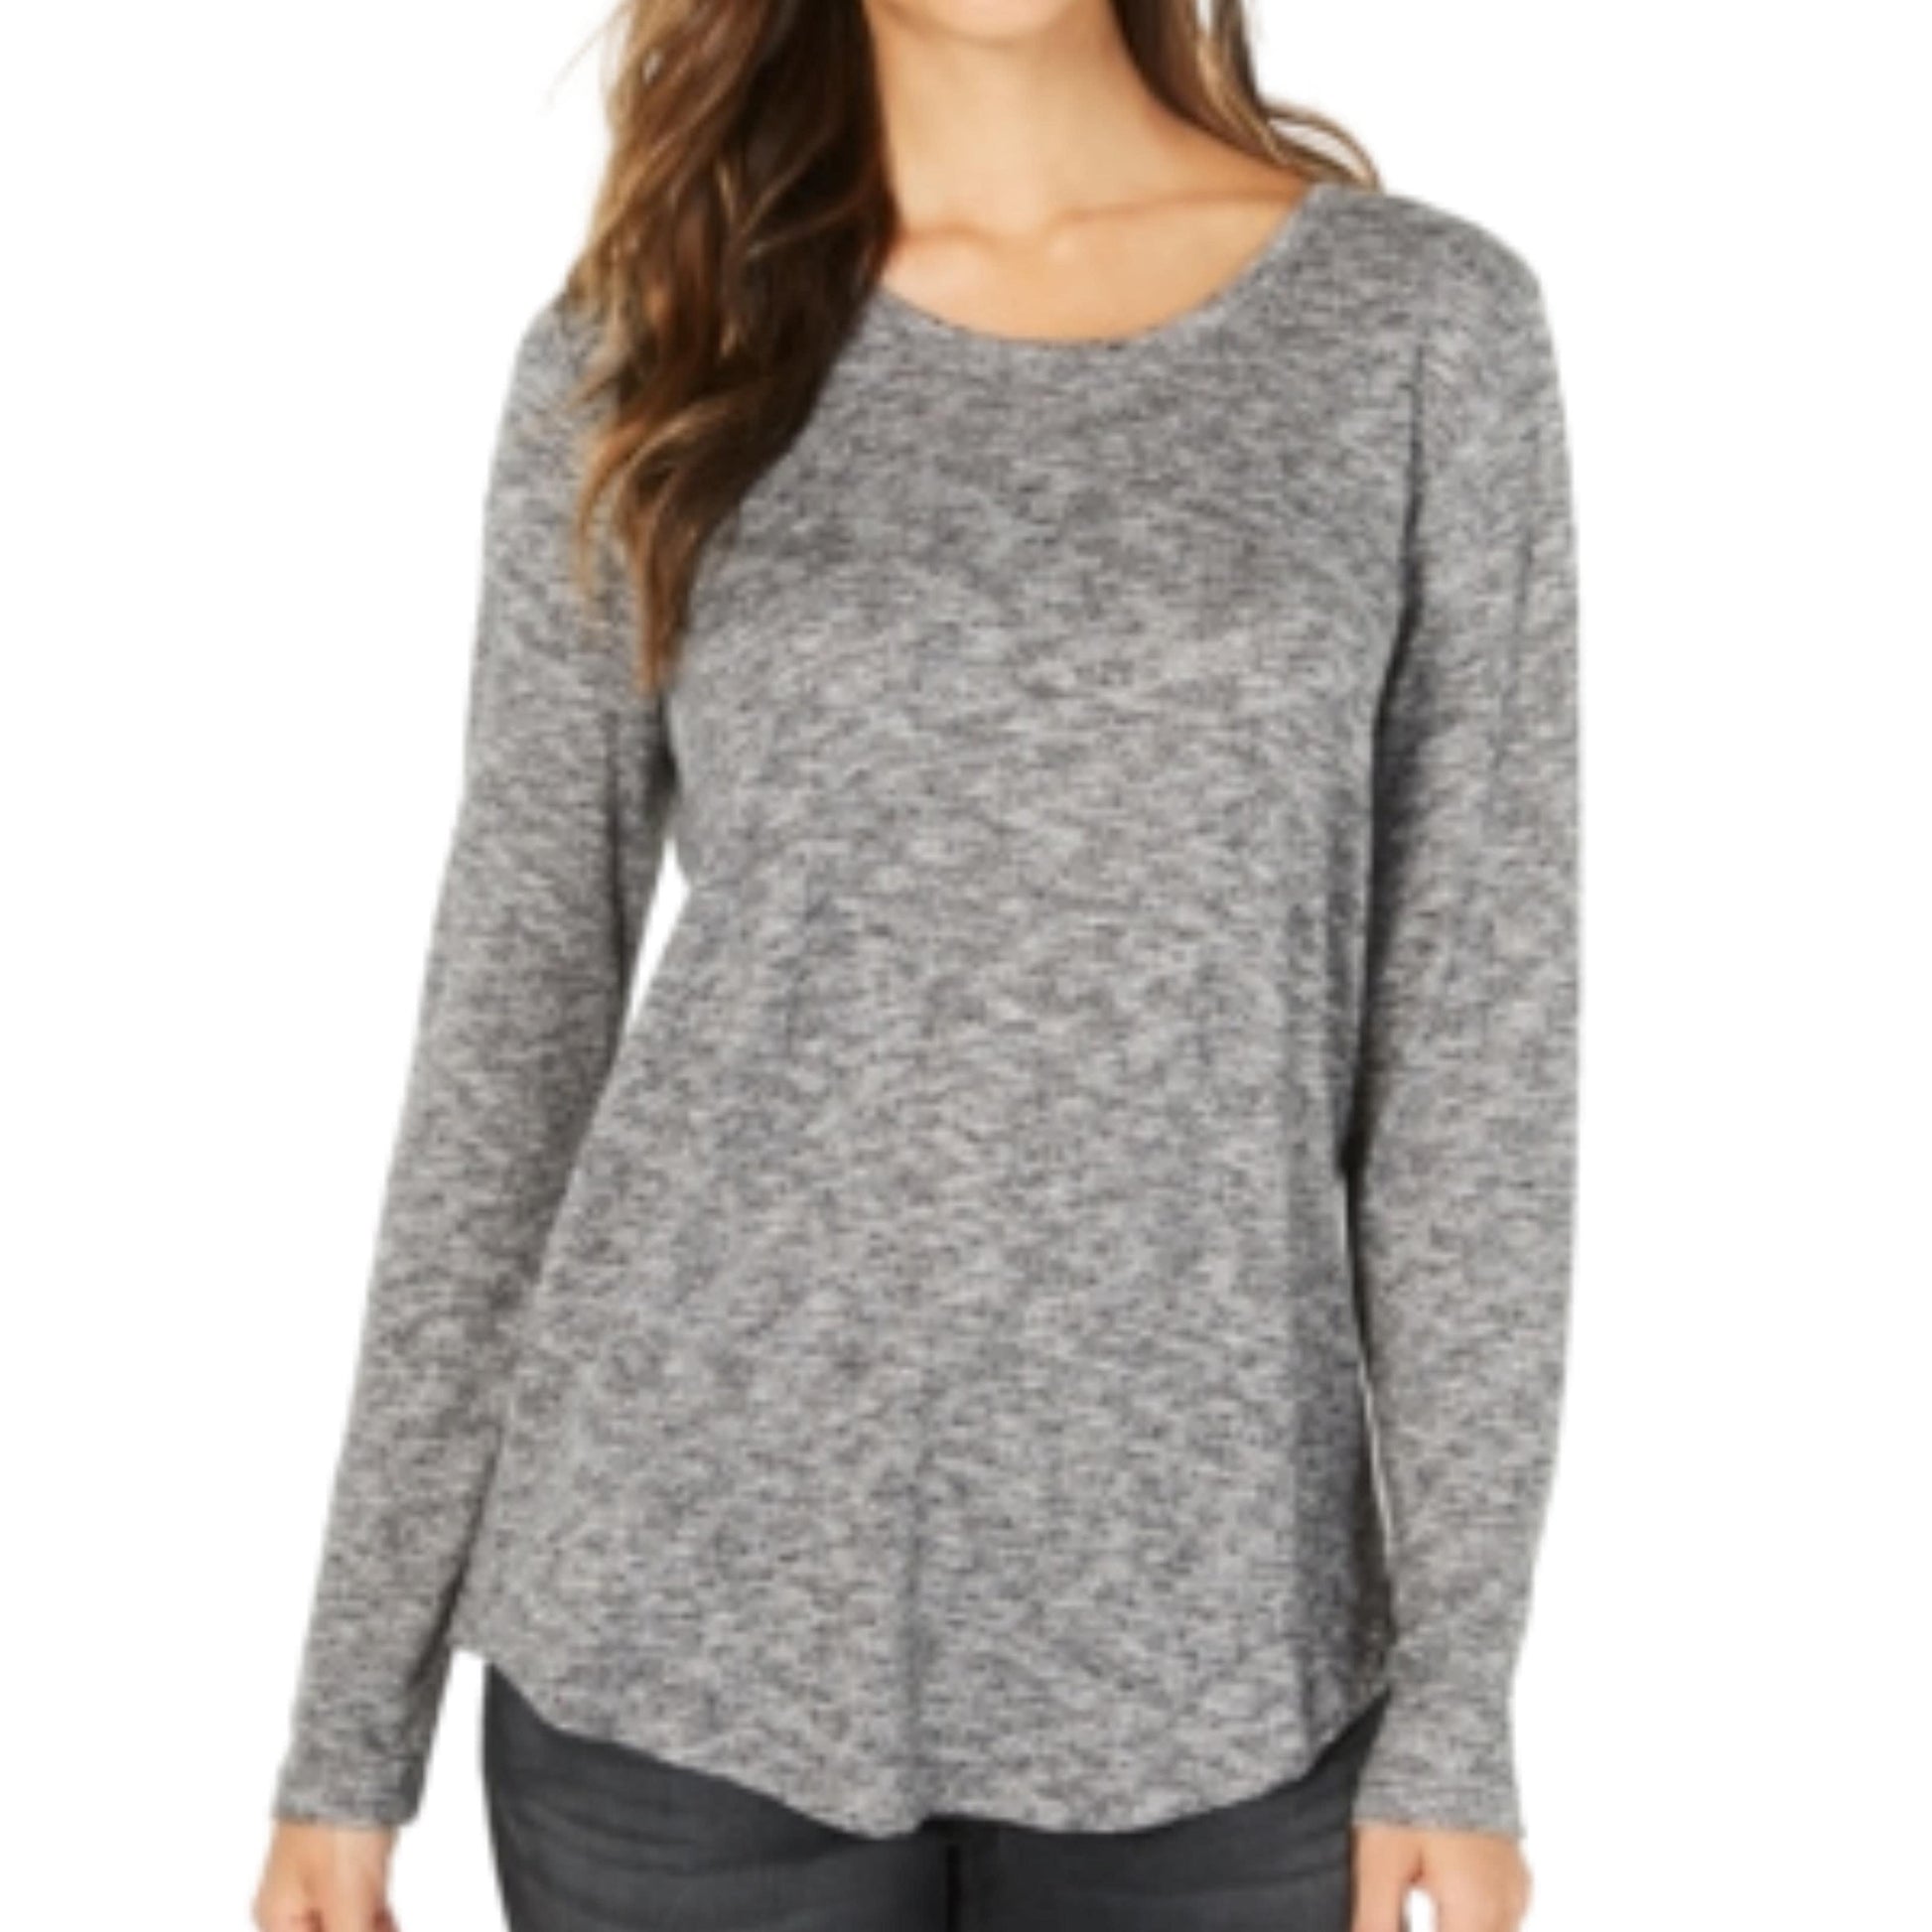 STYLE & CO. Womens Tops L / Grey STYLE & CO. - Long Sleeve Blouse